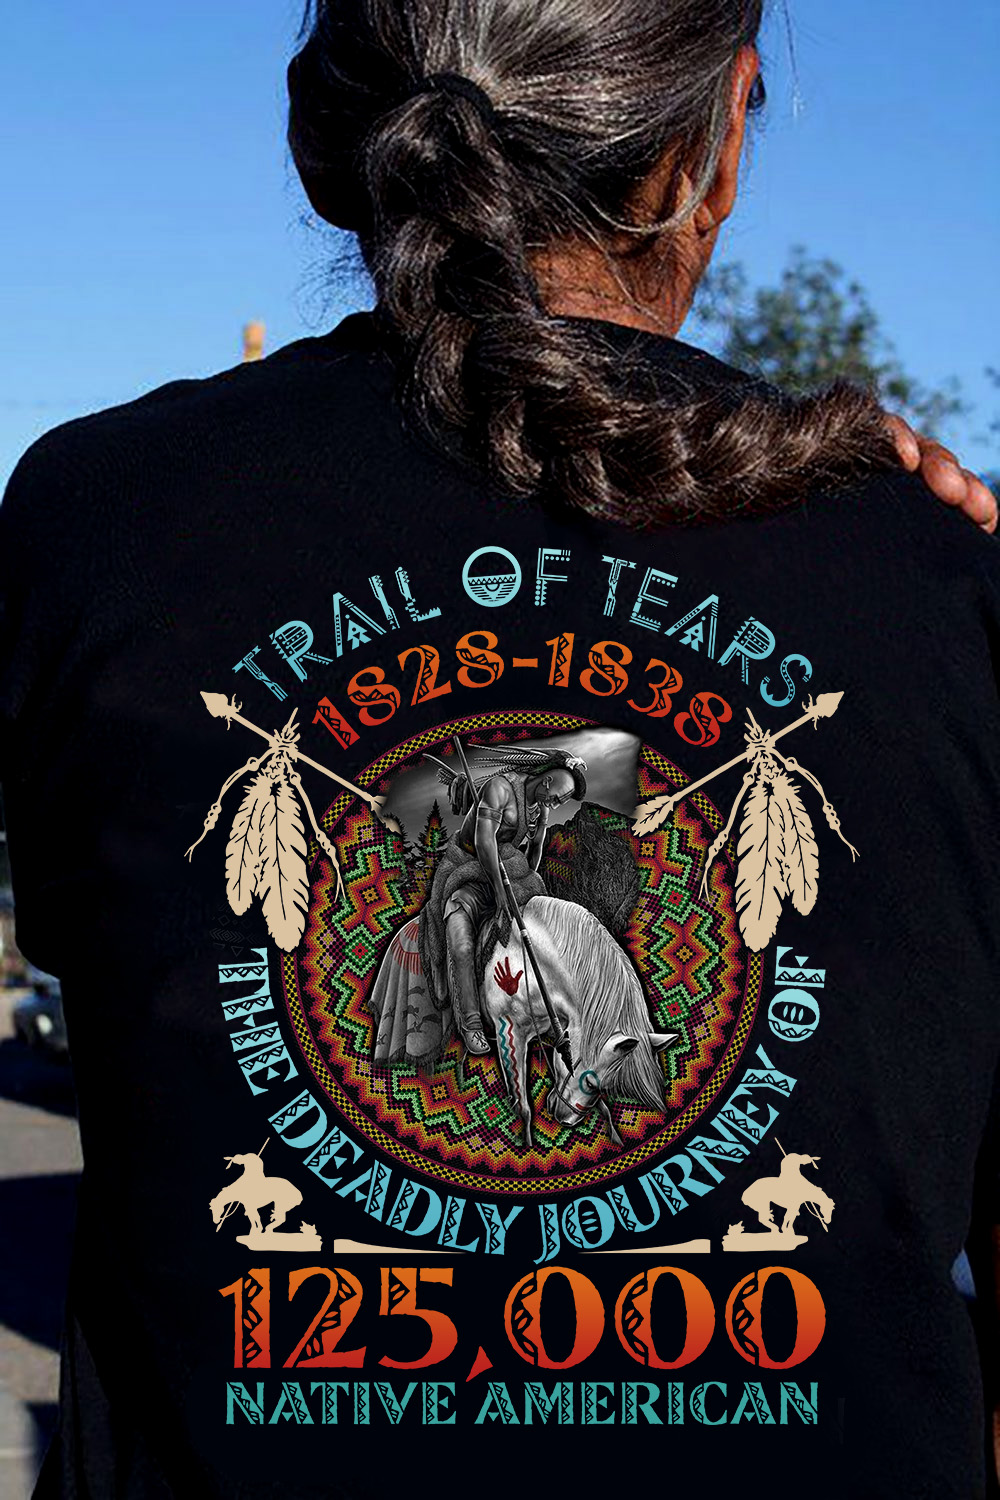 Trail of tears 1828 - 1838 The deadly journey of 125000 native american